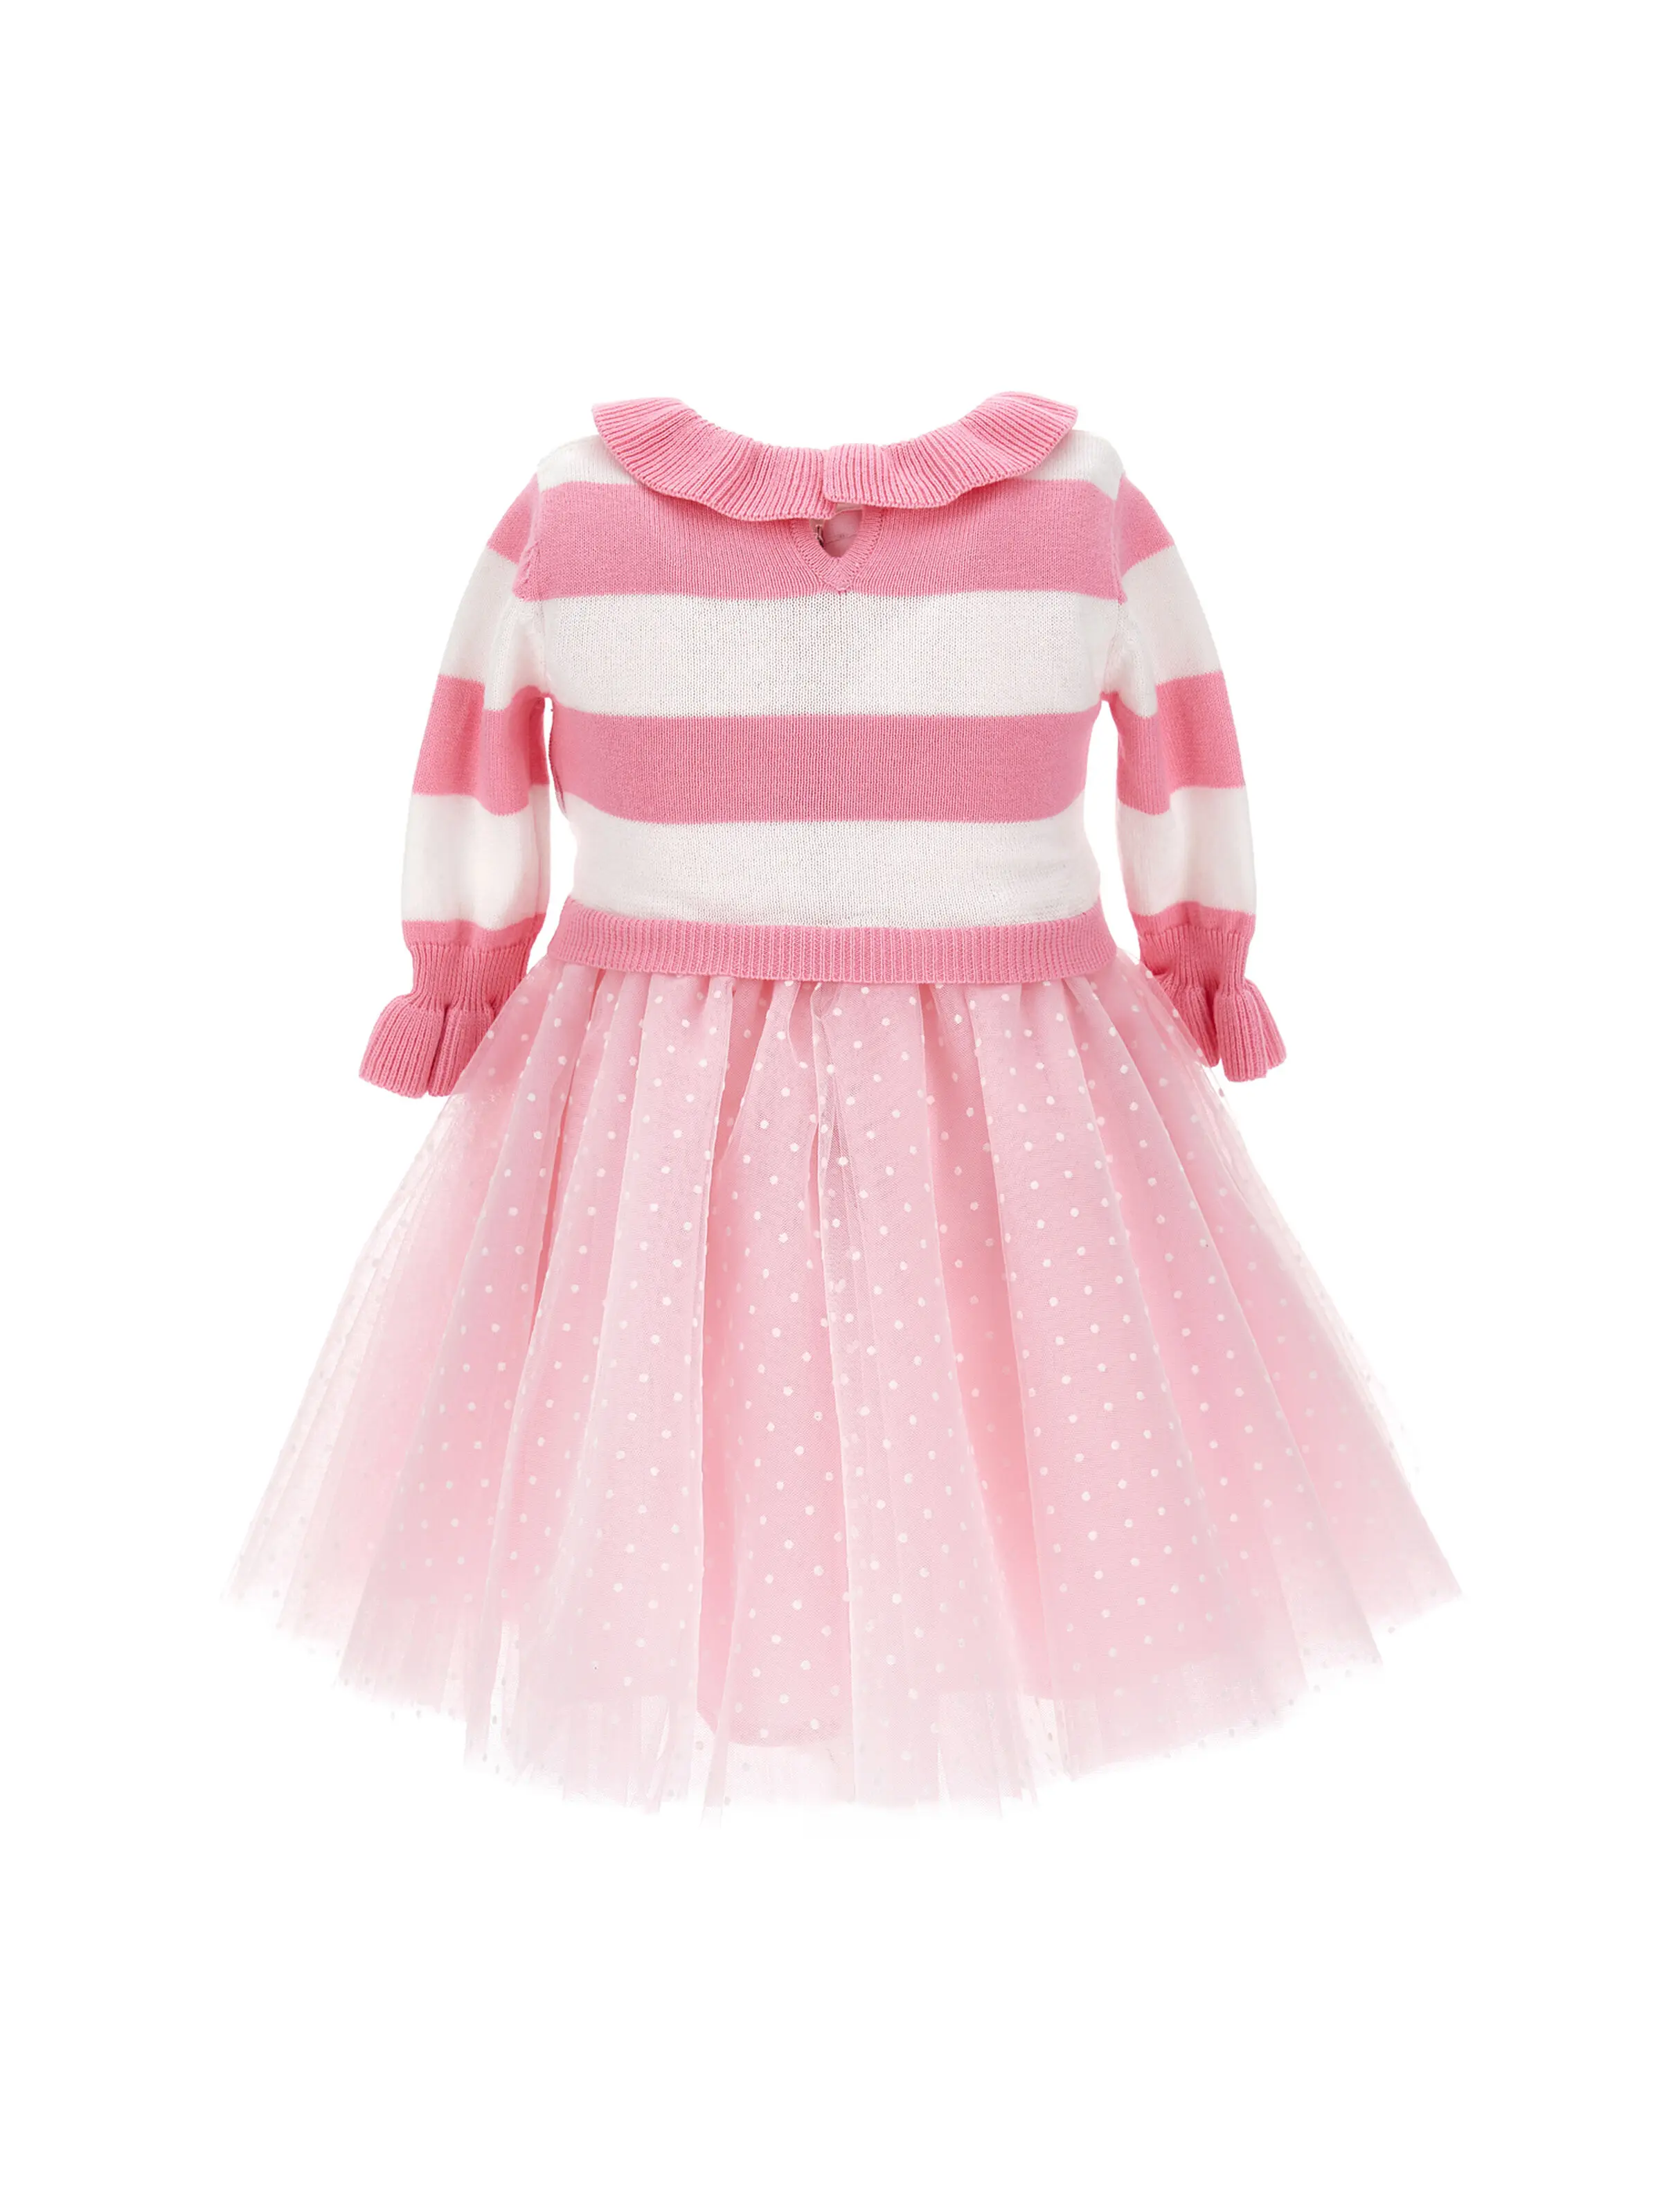 customized turn down collar ruffle stripe  pink and white  knitted sweater dress with tulle girl autumn baby  Fall winter girl d